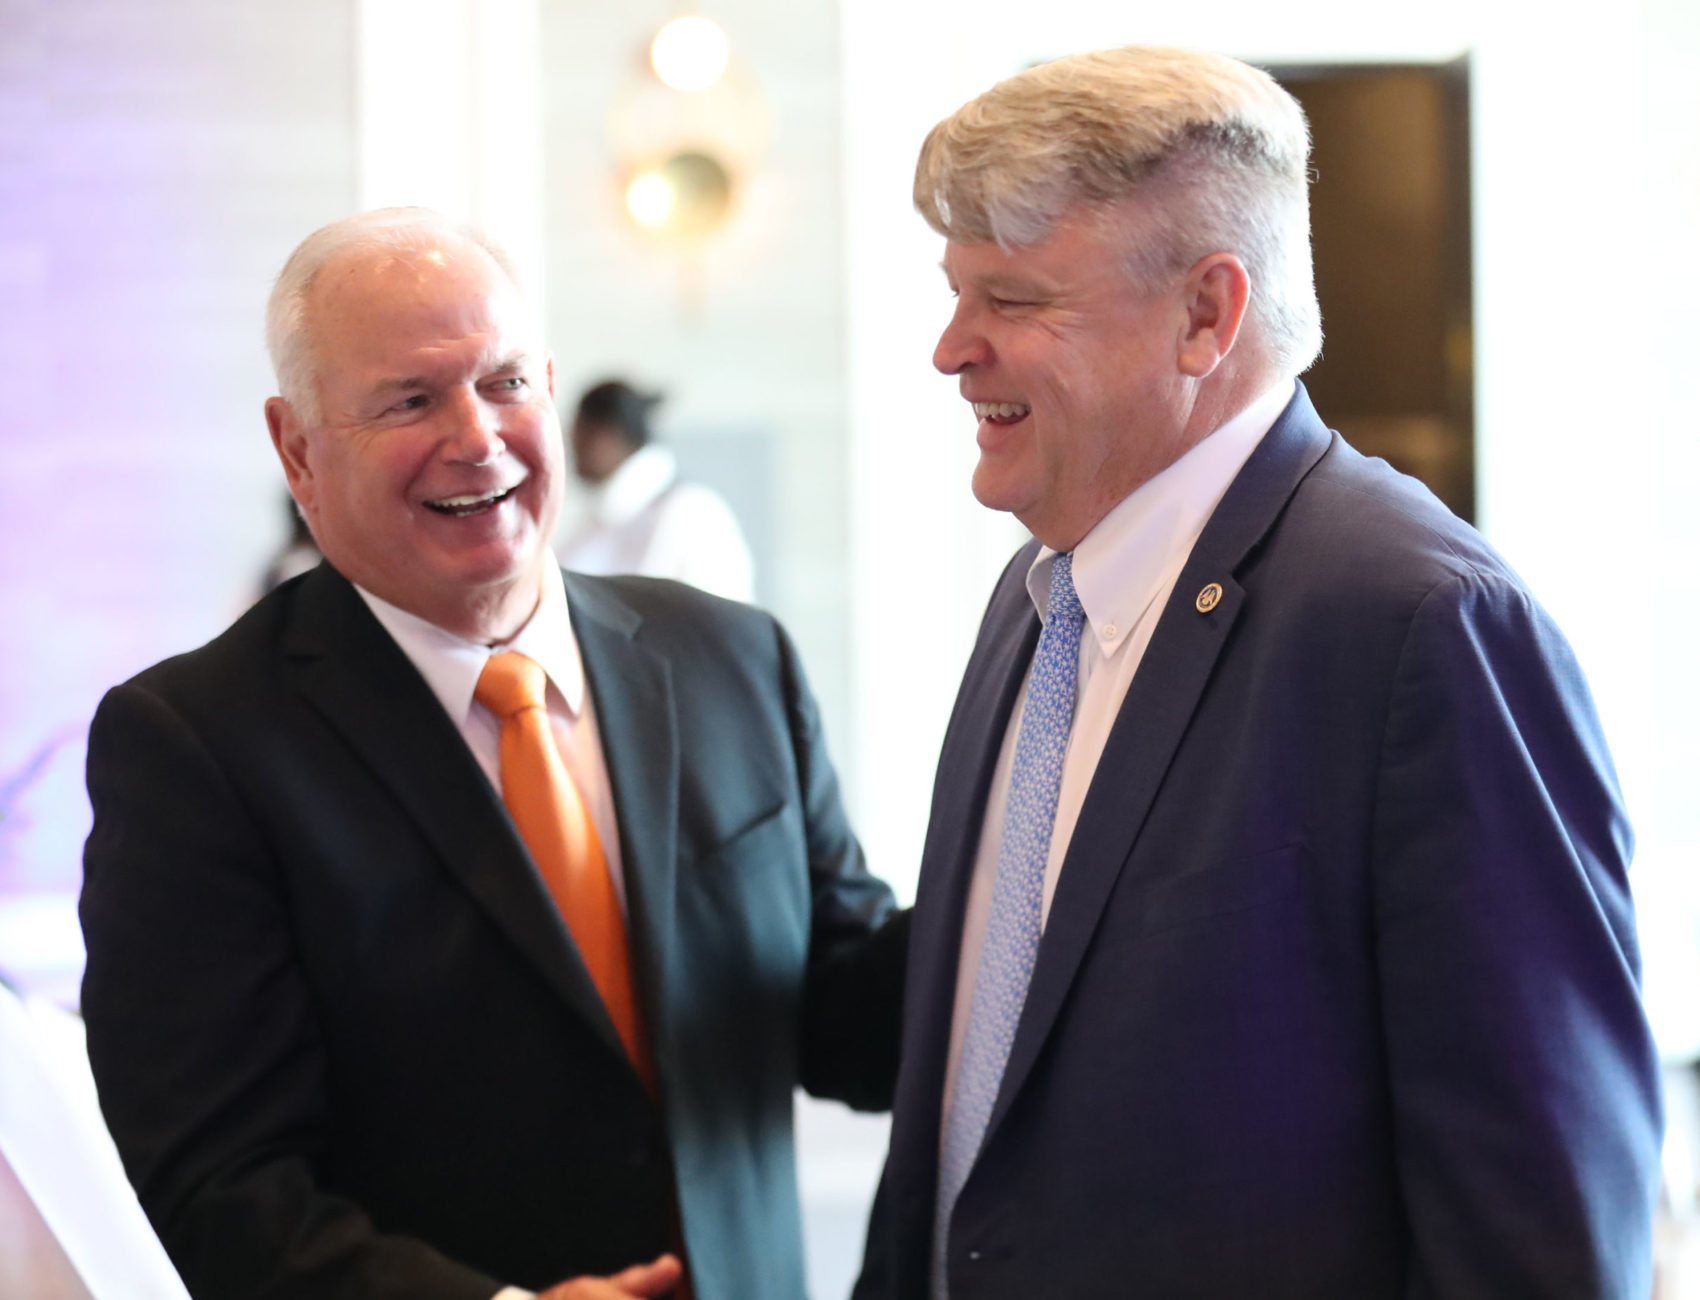 The World Trade Center of New Orleans honored Sean Duffy Sr. as the recipient of the C. Alvin Bertel Awards during a ceremony in the Plimsoll Ballroom at the Four Seasons Hotel in New Orleans, Louisiana on Friday, June 24, 2022.  (Photo by Peter G. Forest/Forest Photography, LLC)